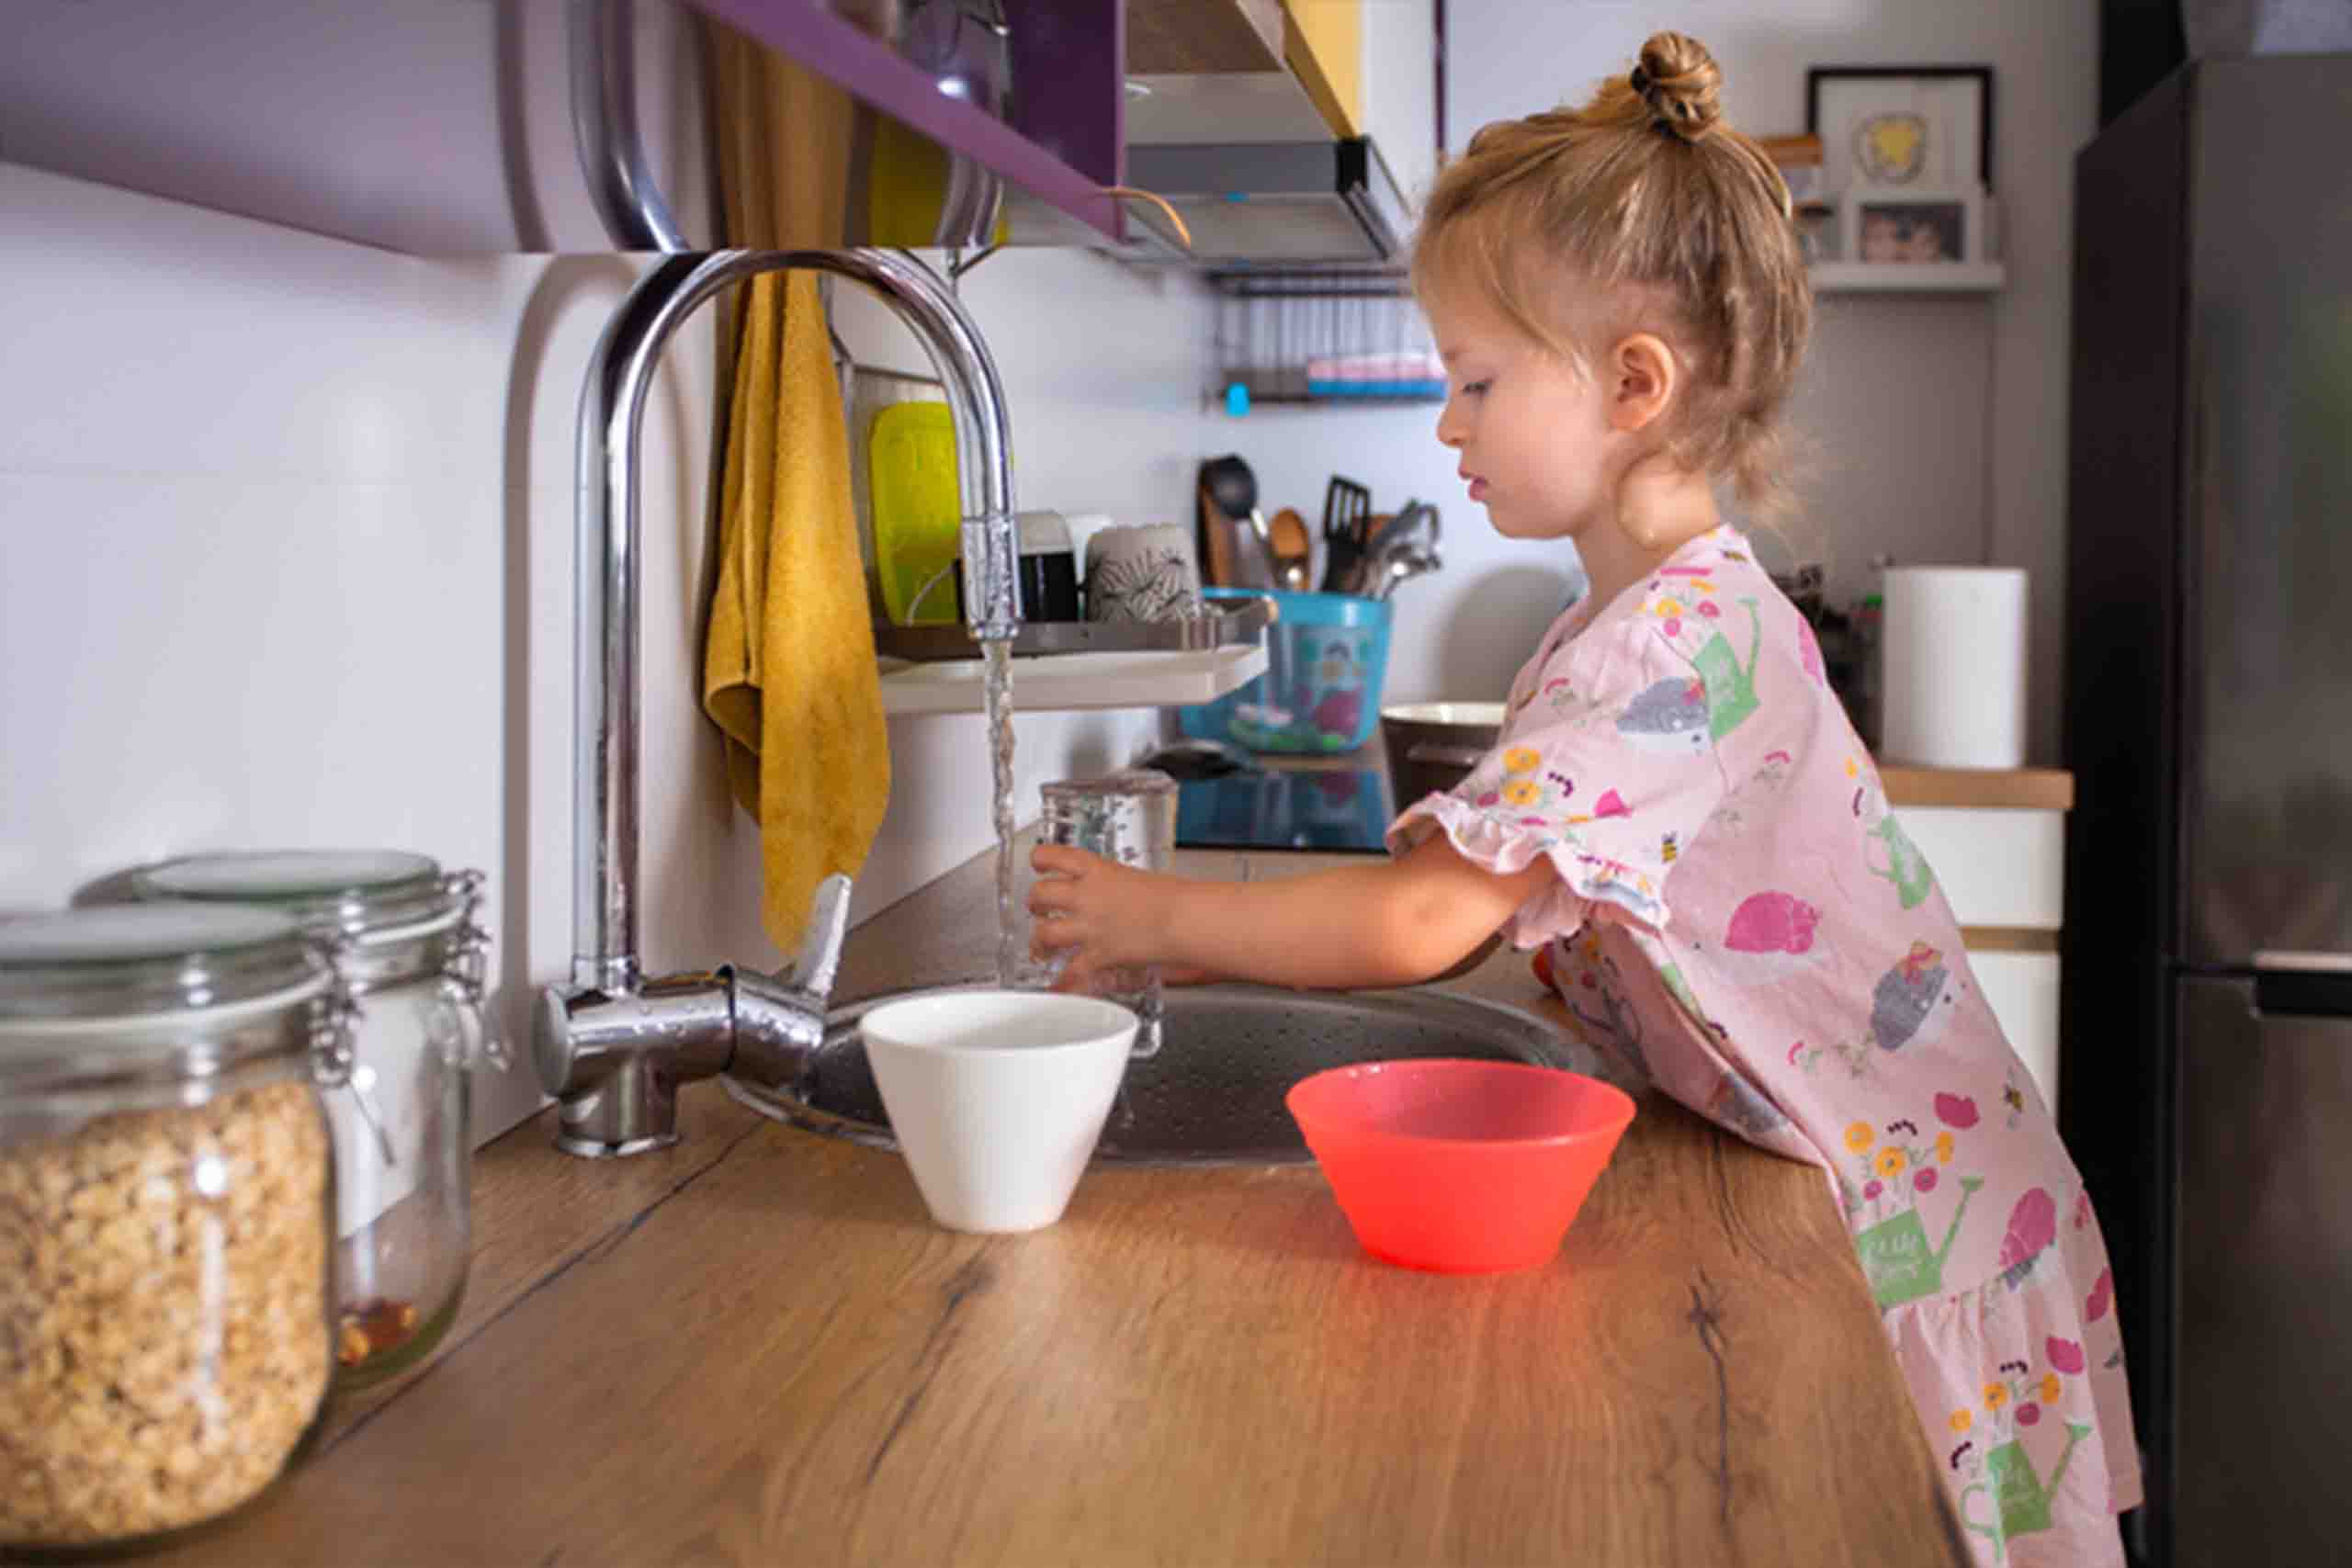 A girl in a pink dress filling a cup of tap water in her kitchen.